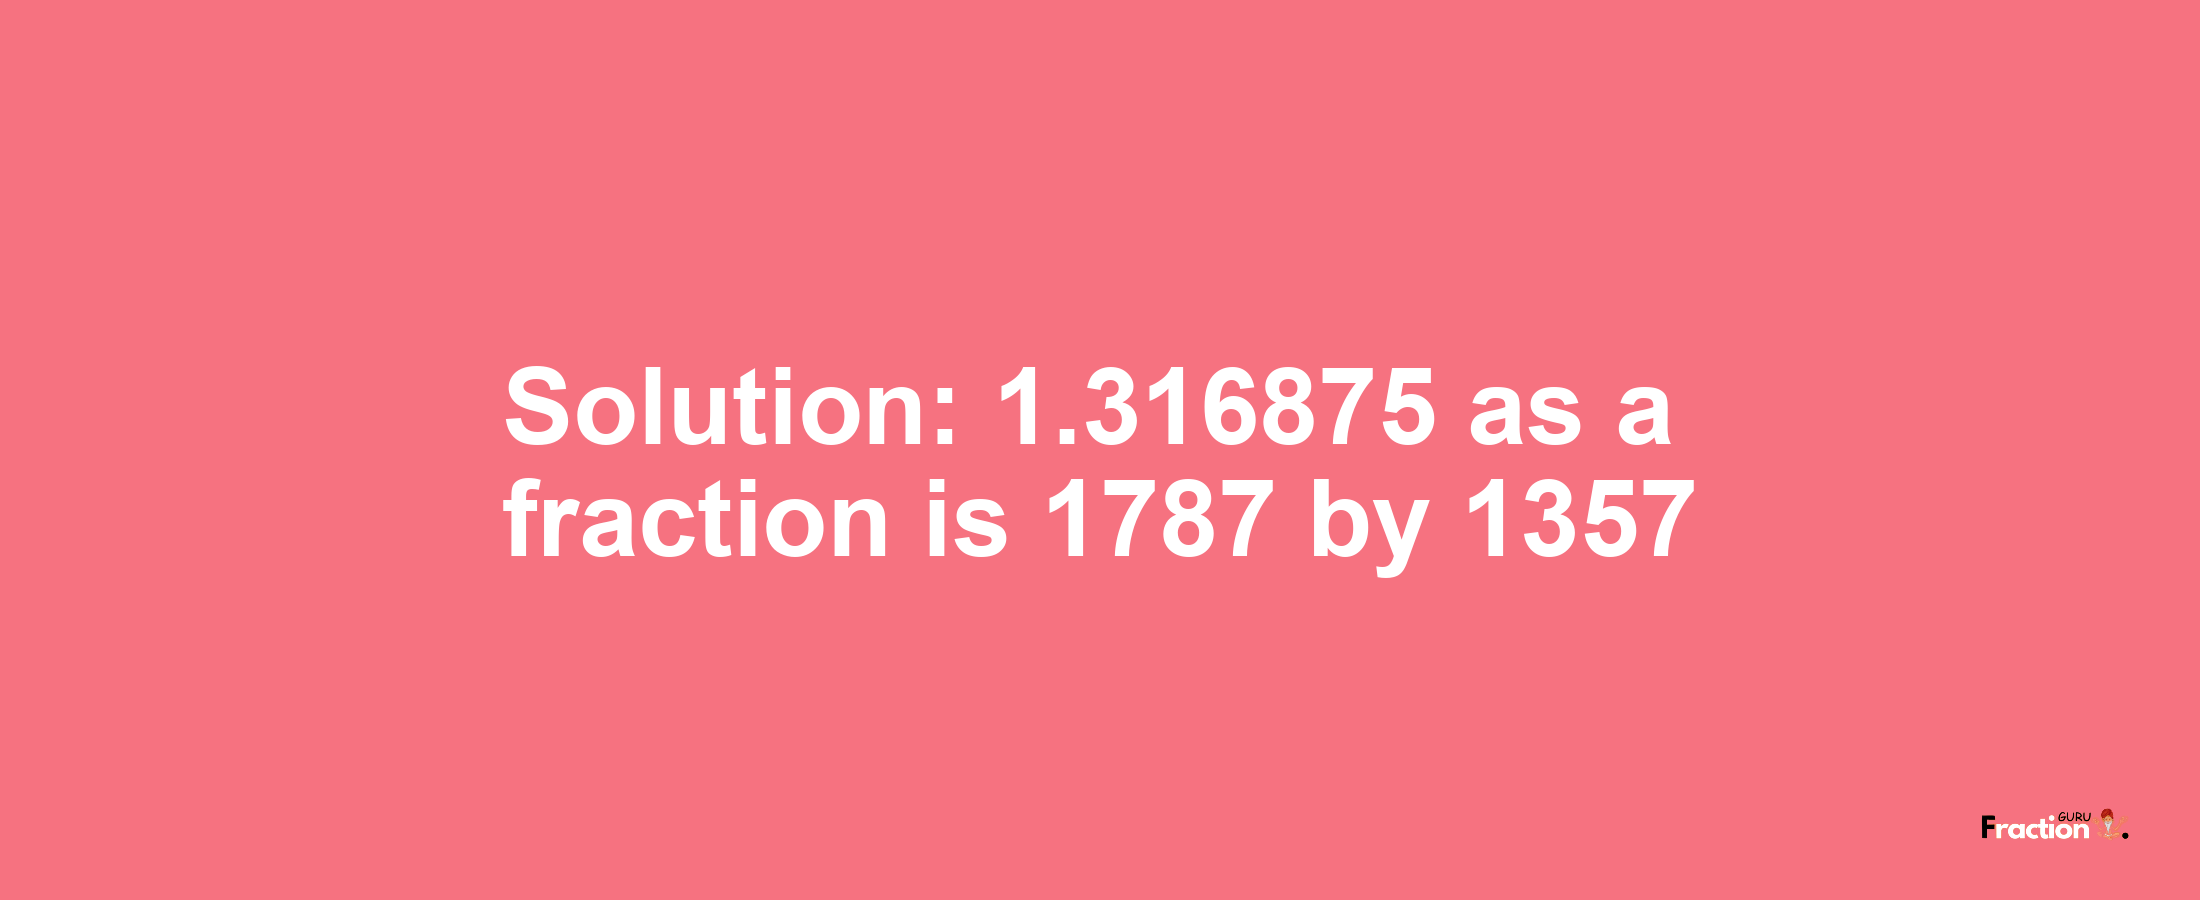 Solution:1.316875 as a fraction is 1787/1357